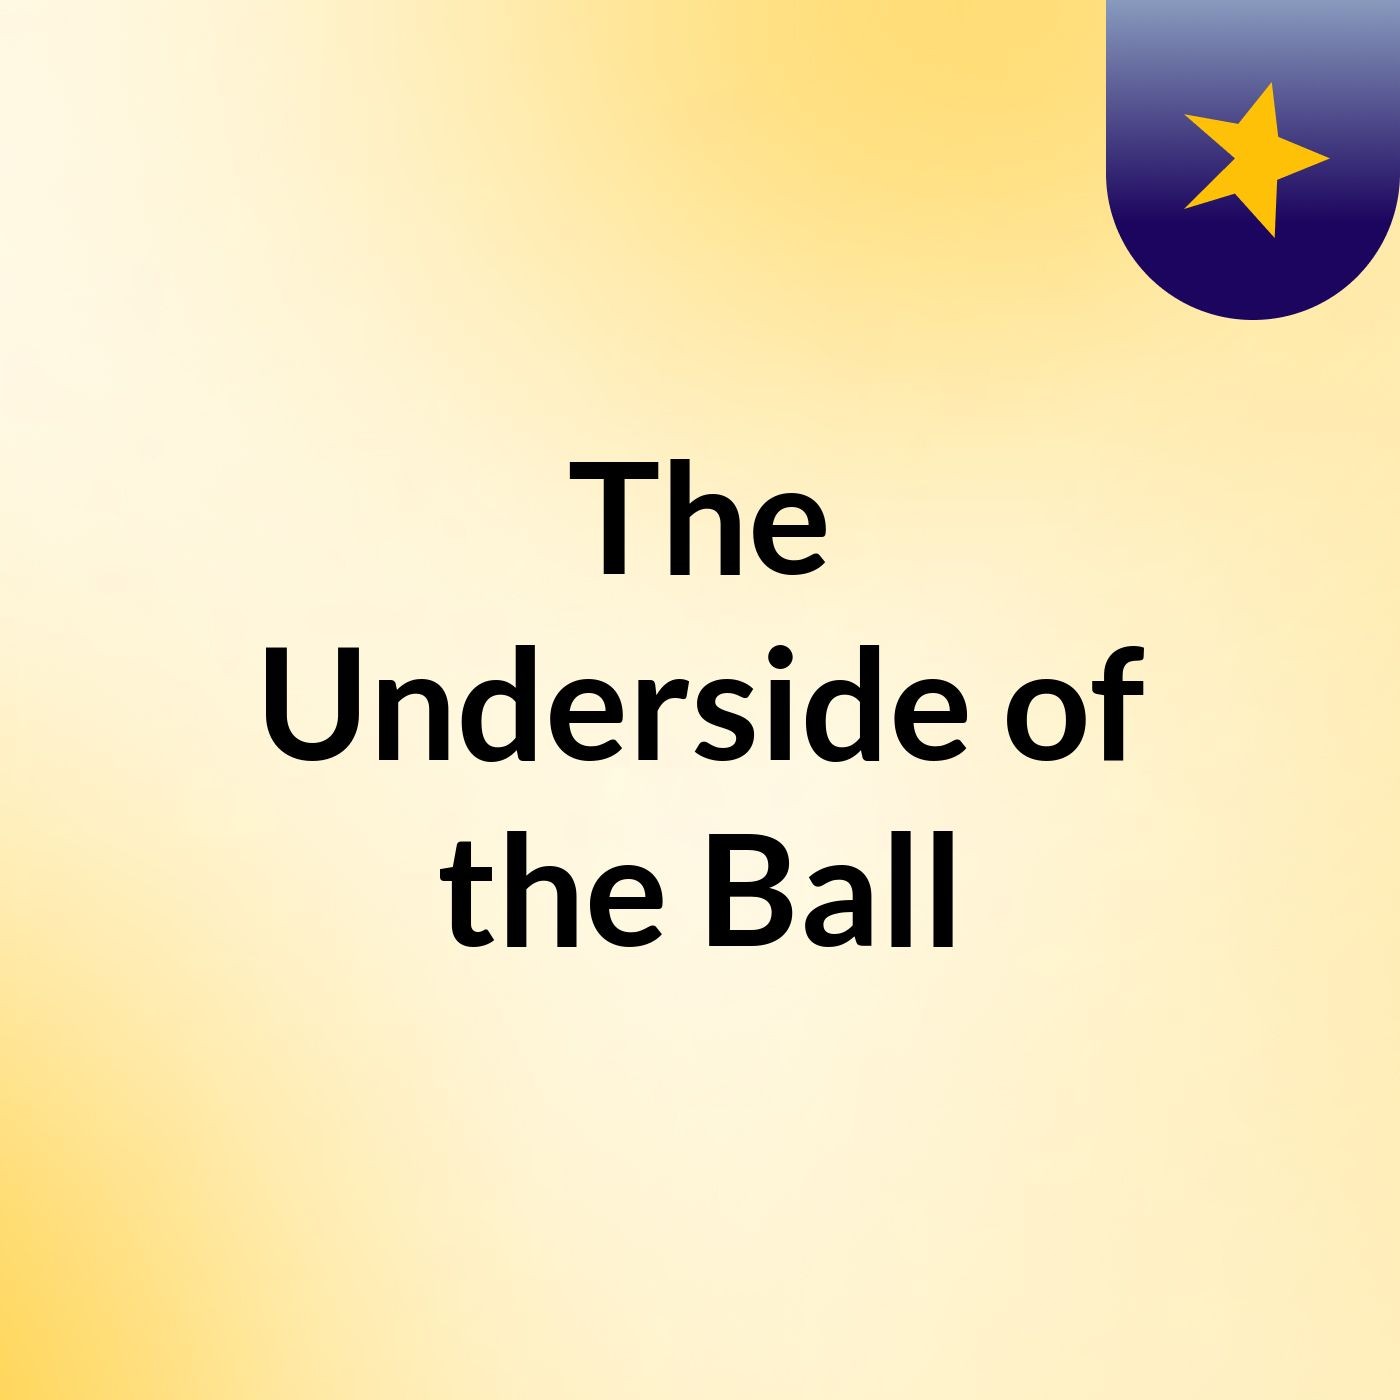 The Underside of the Ball